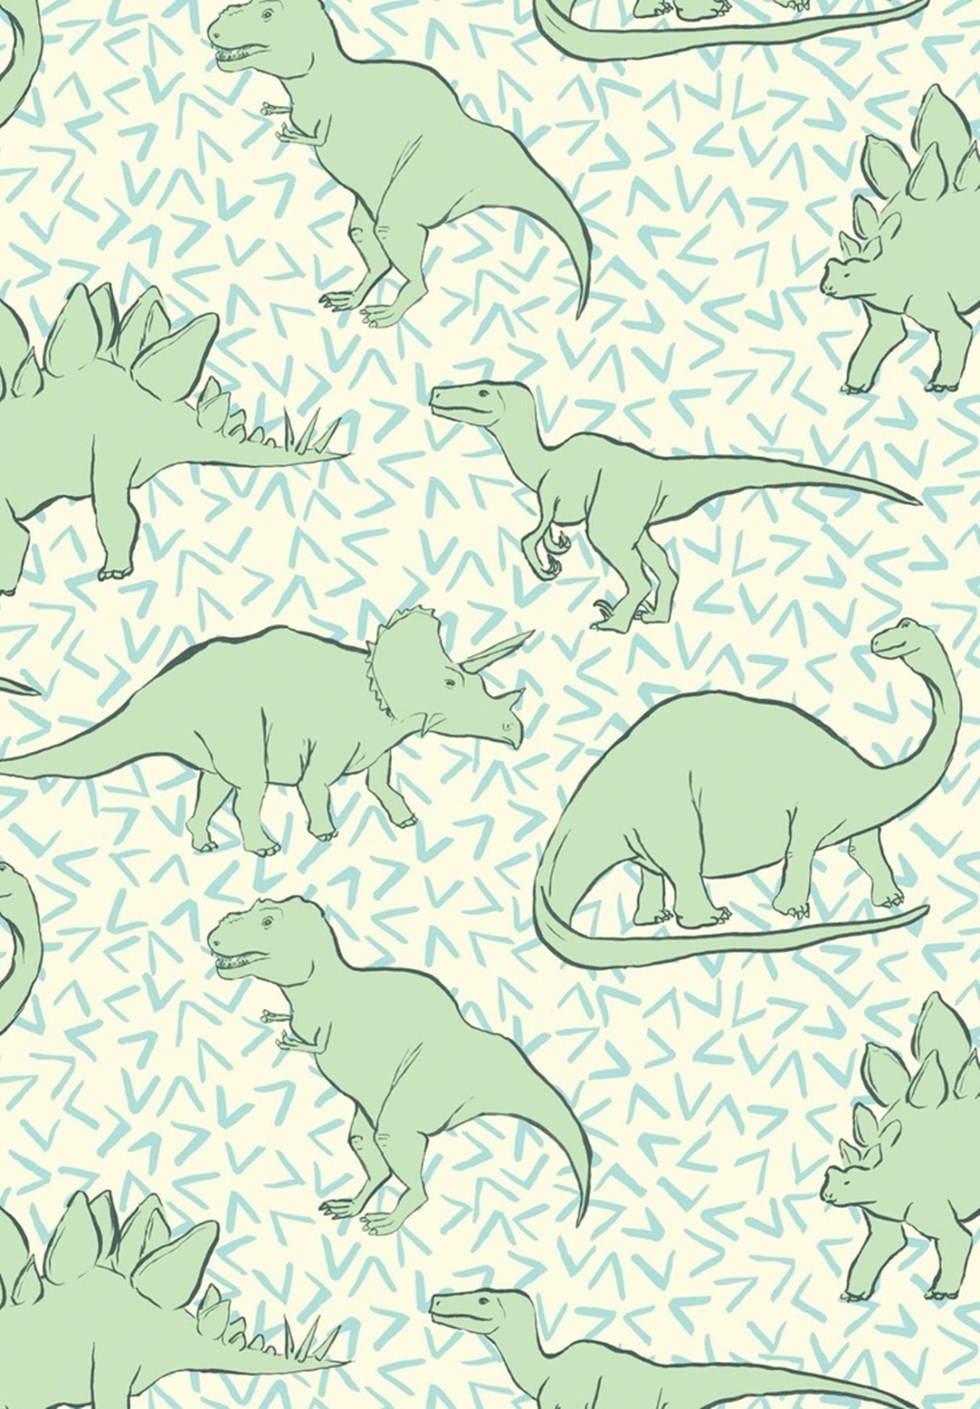 "Power up your phone with this adorable cute dinosaur iPhone wallpaper!" Wallpaper